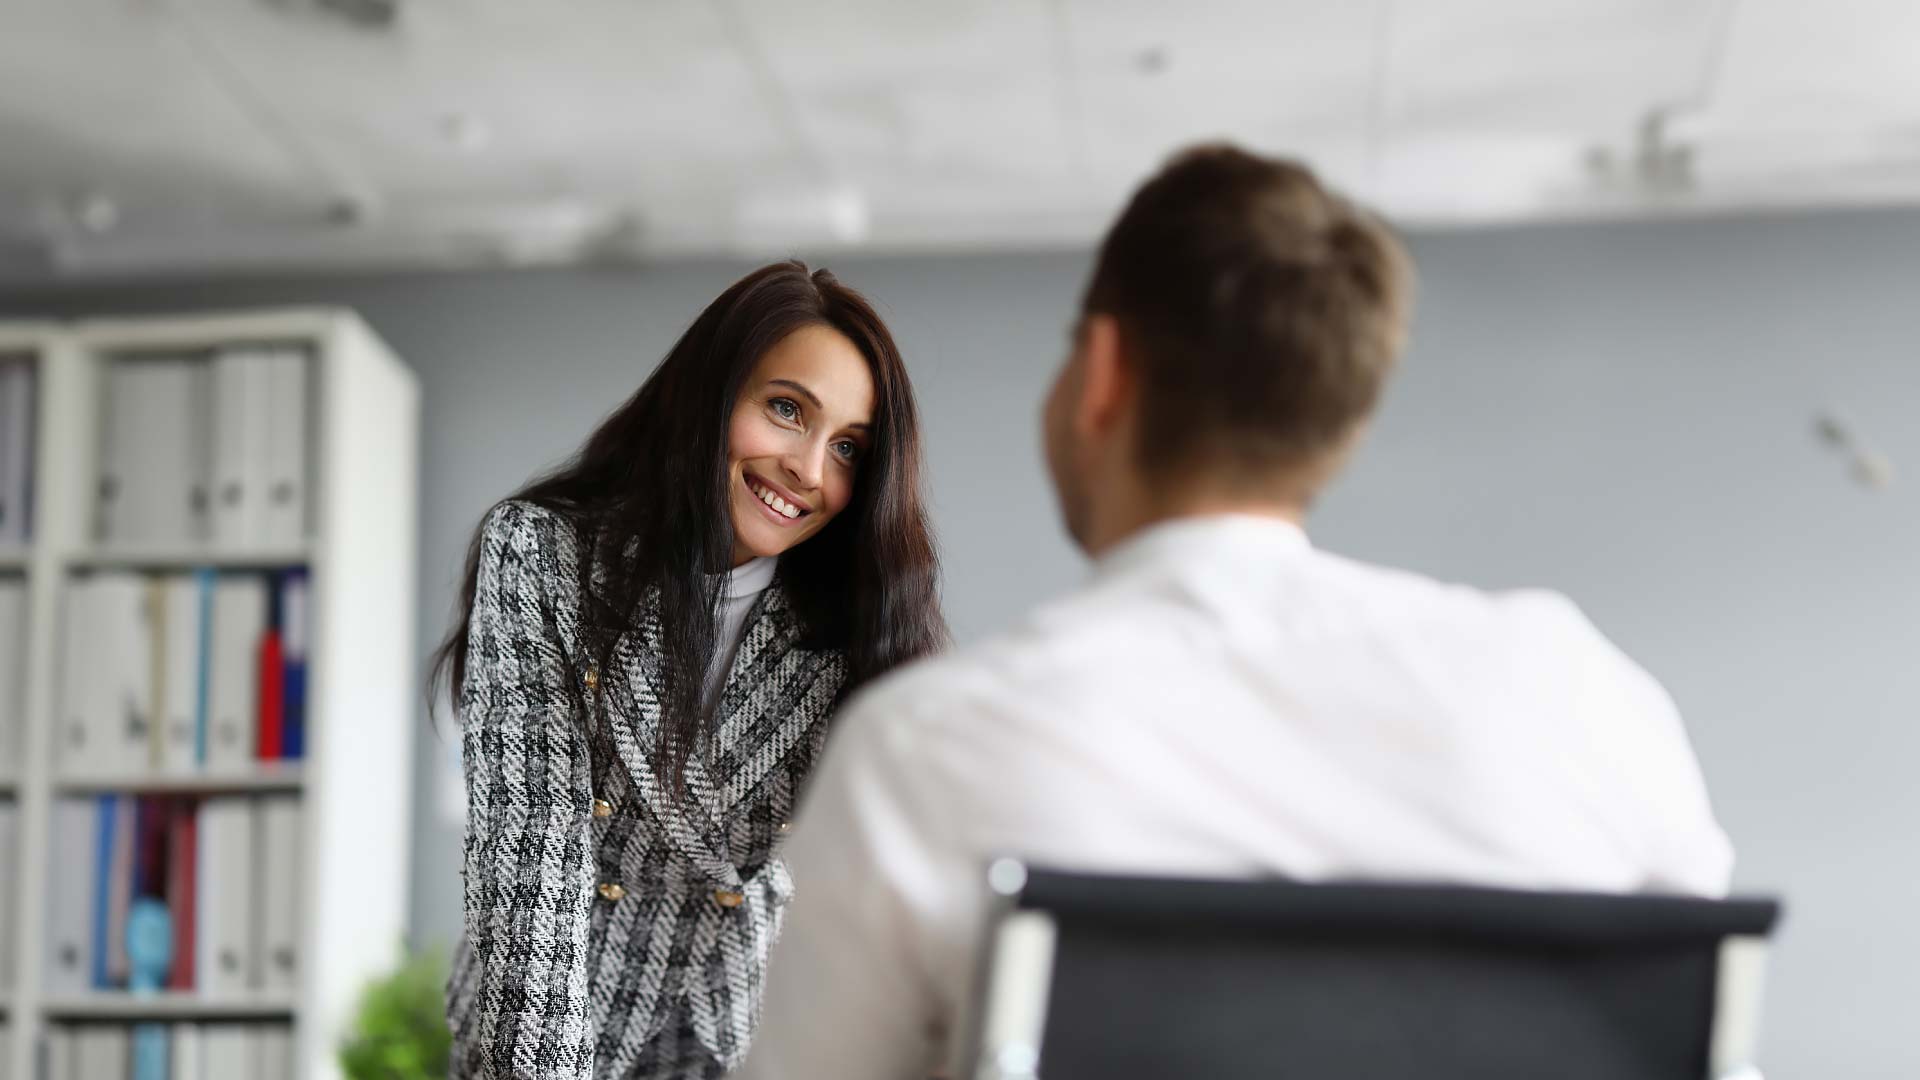 3 Reasons Why You Shouldn’t Hit On Someone While They’re Working